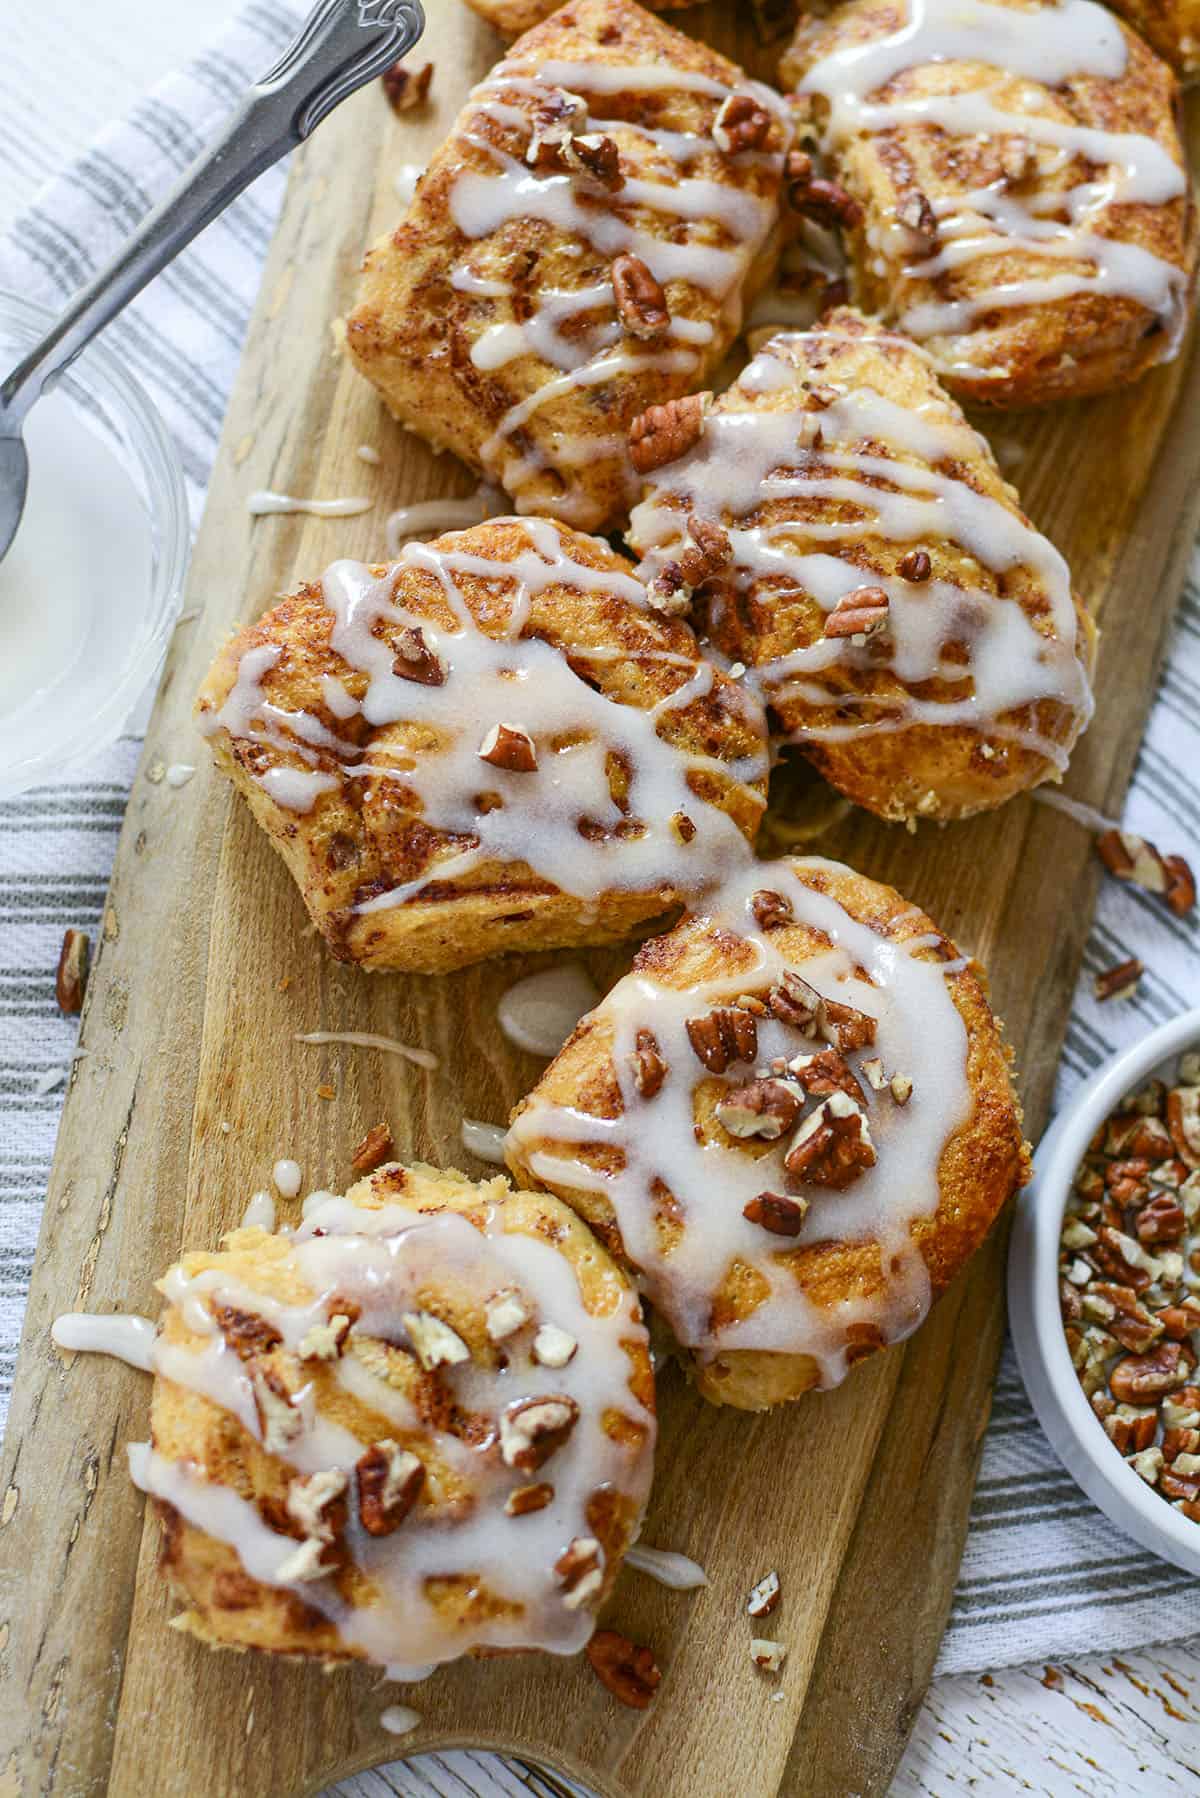 Six cinnamon rolls on a wooden cutting board with icing and walnuts on top.